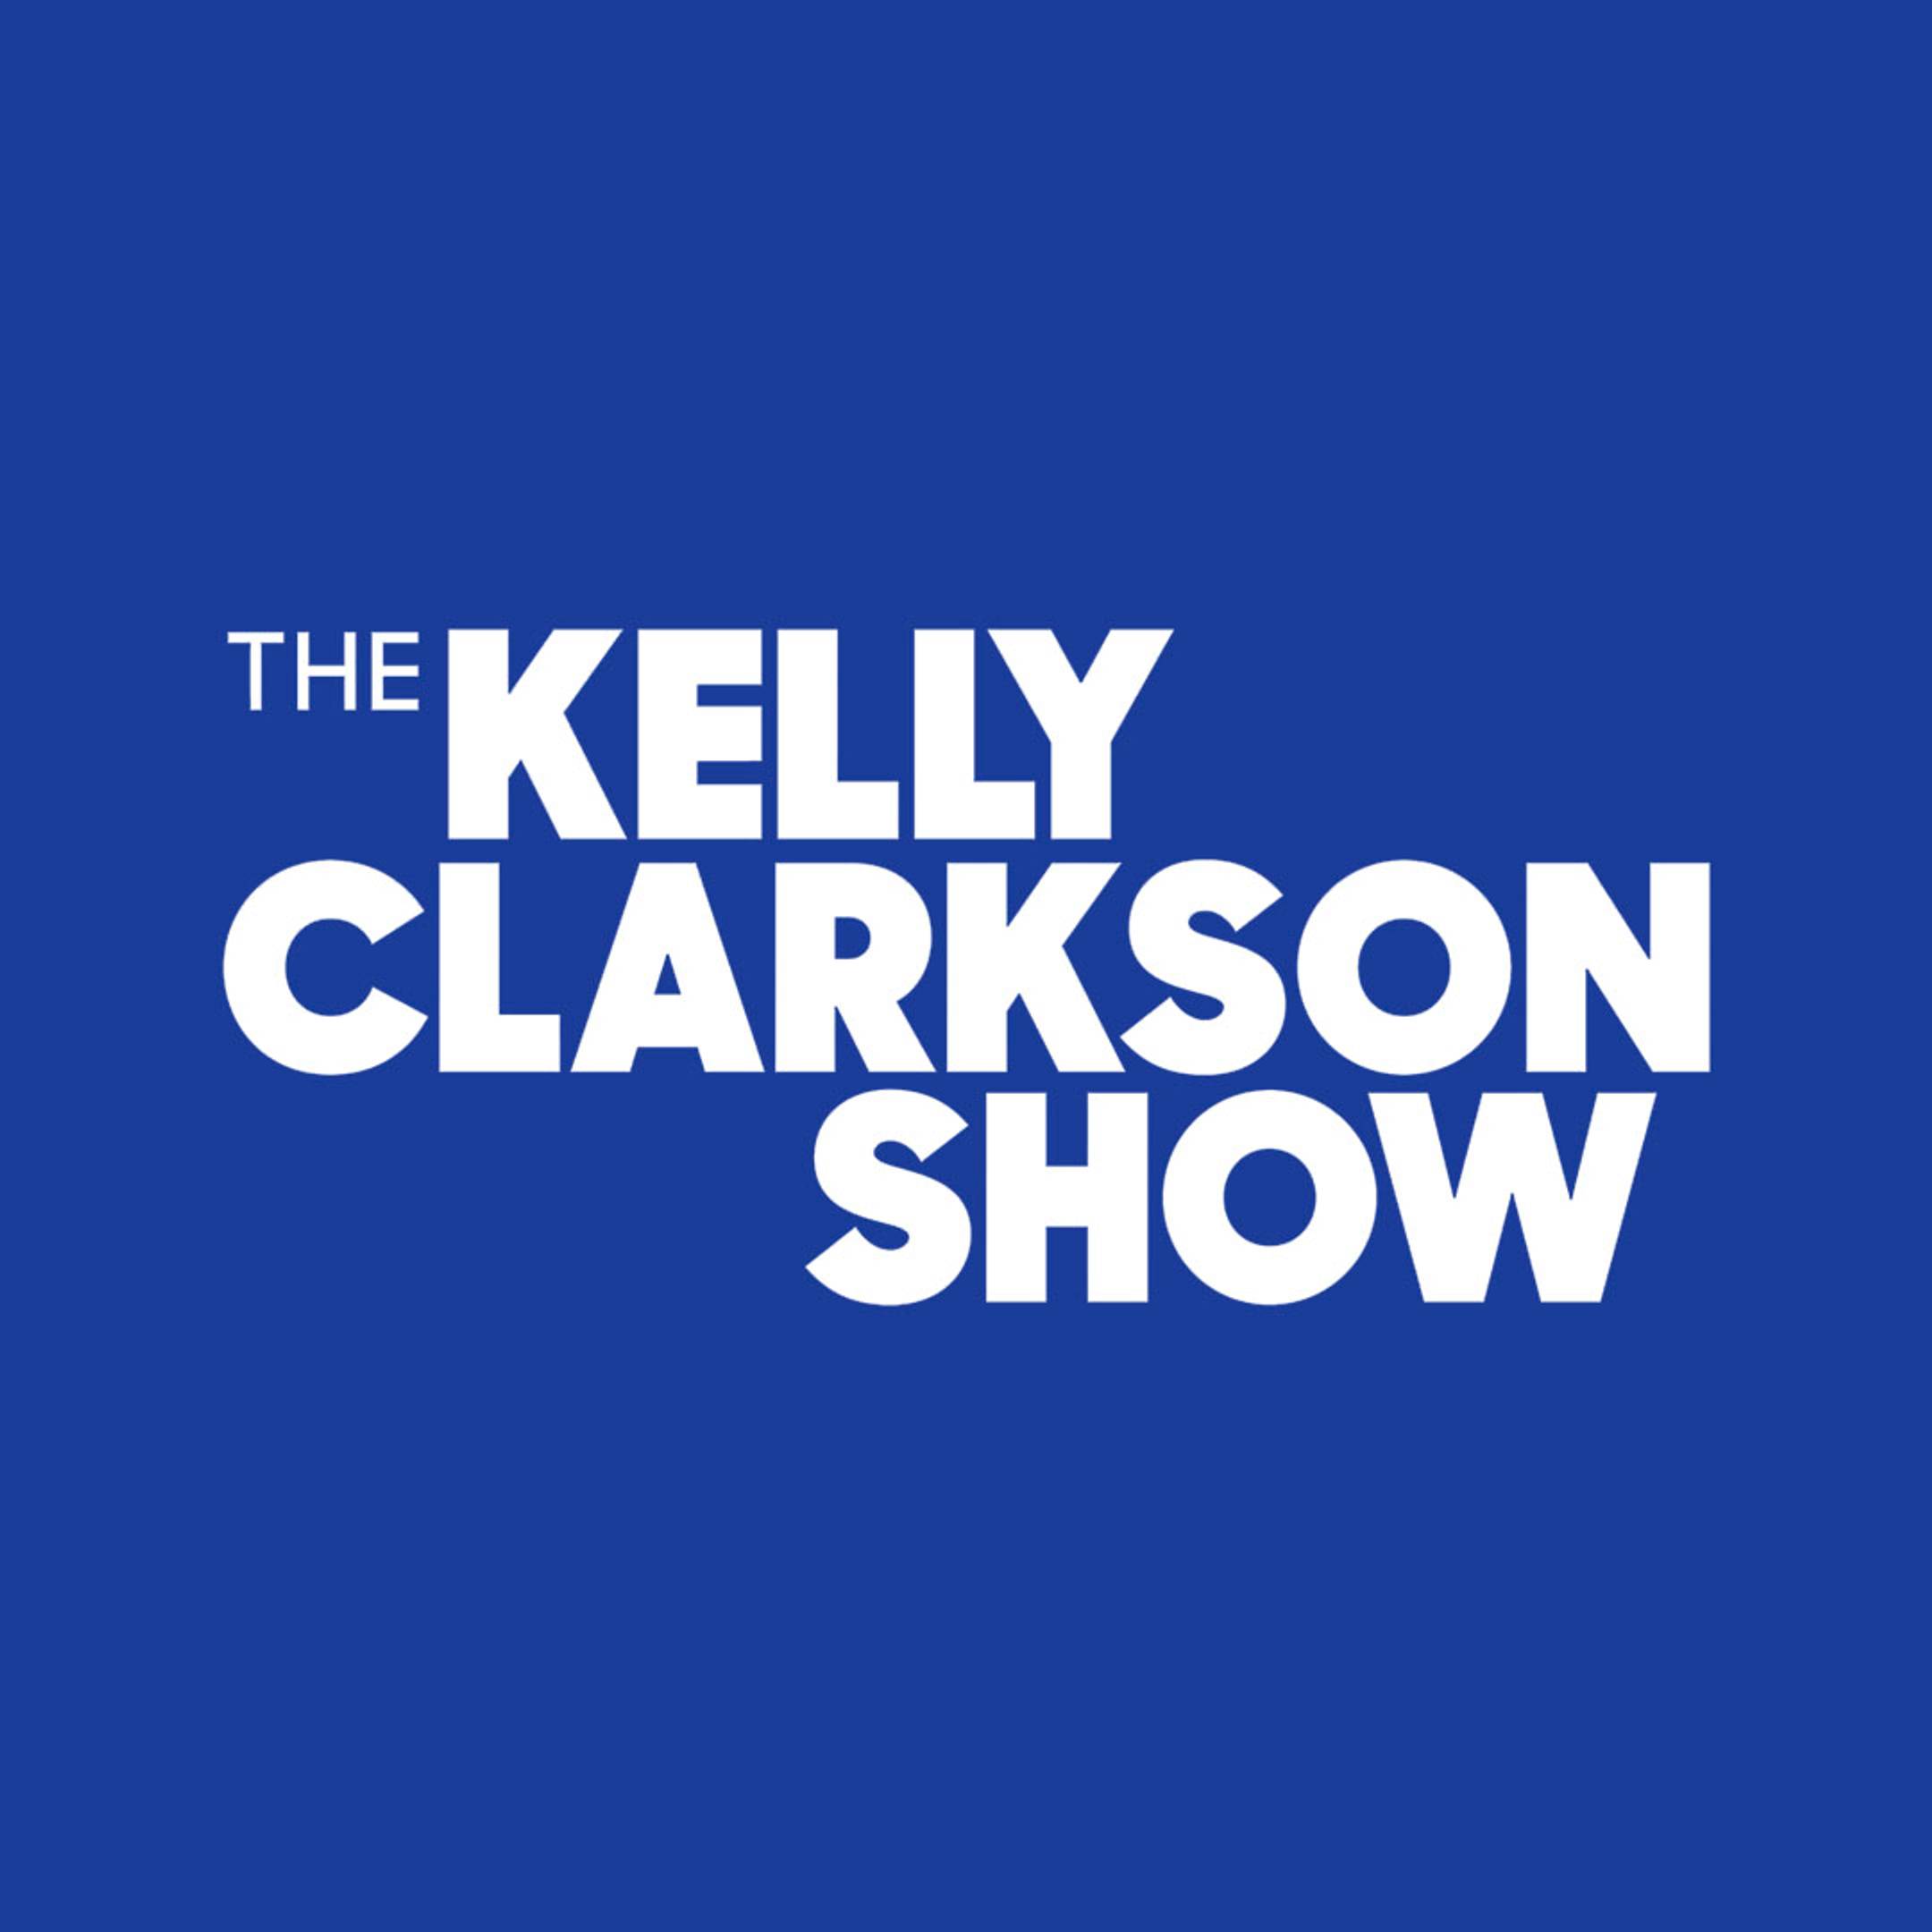 The Kelly Clarkson Show logo on blue background 